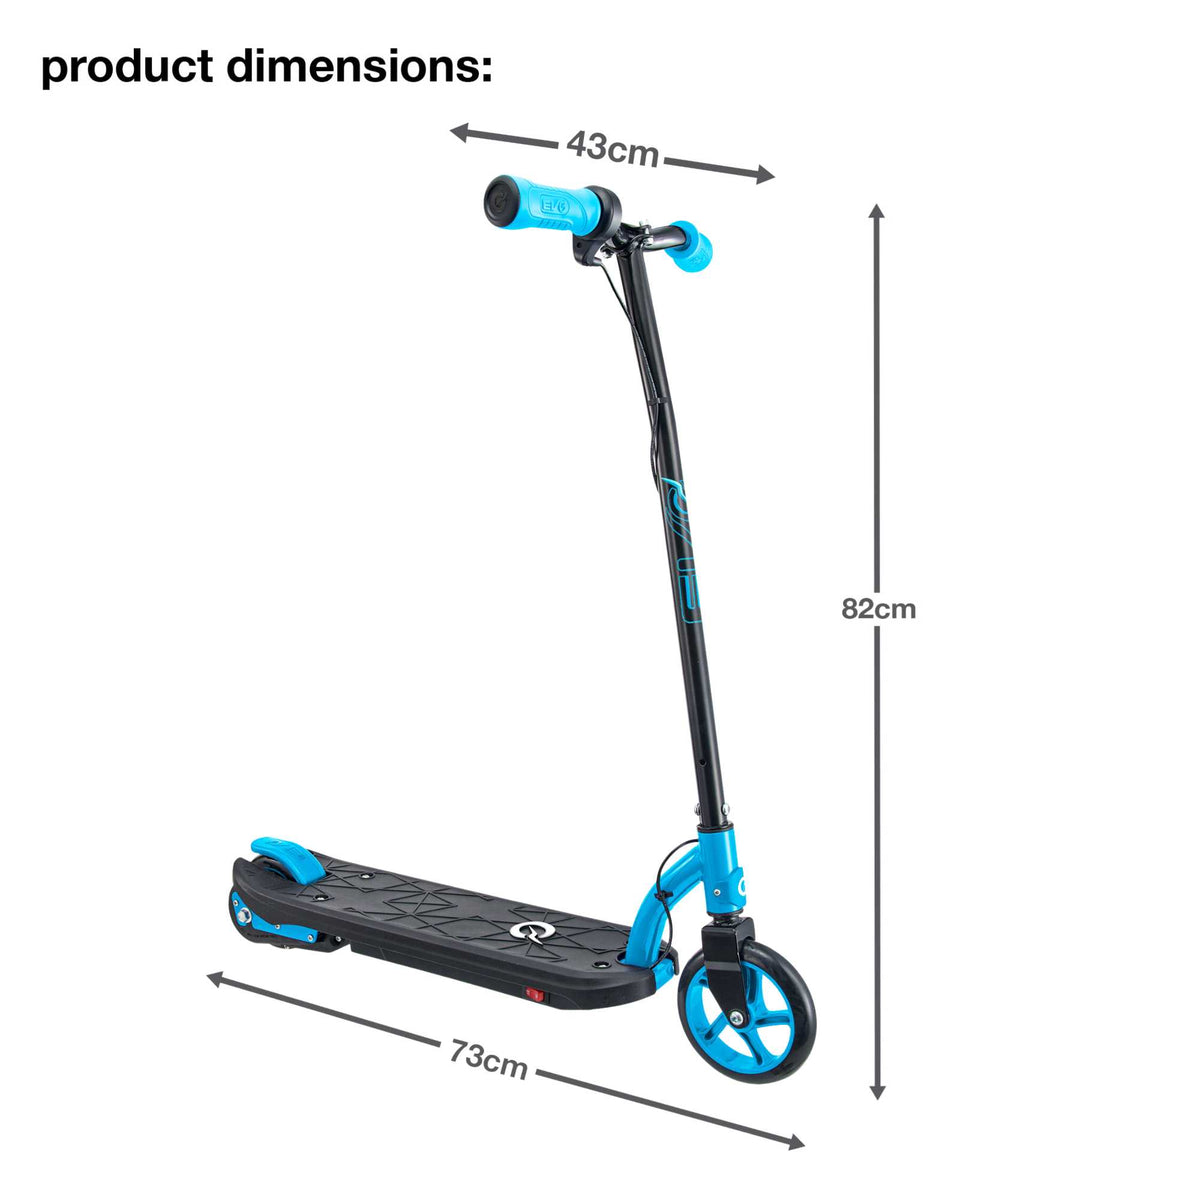 Childrens Electric Scooter, E-Scooter, Childrens Ride On, Electric Ride On, Rechargeable Scooter, Childrens Scooters